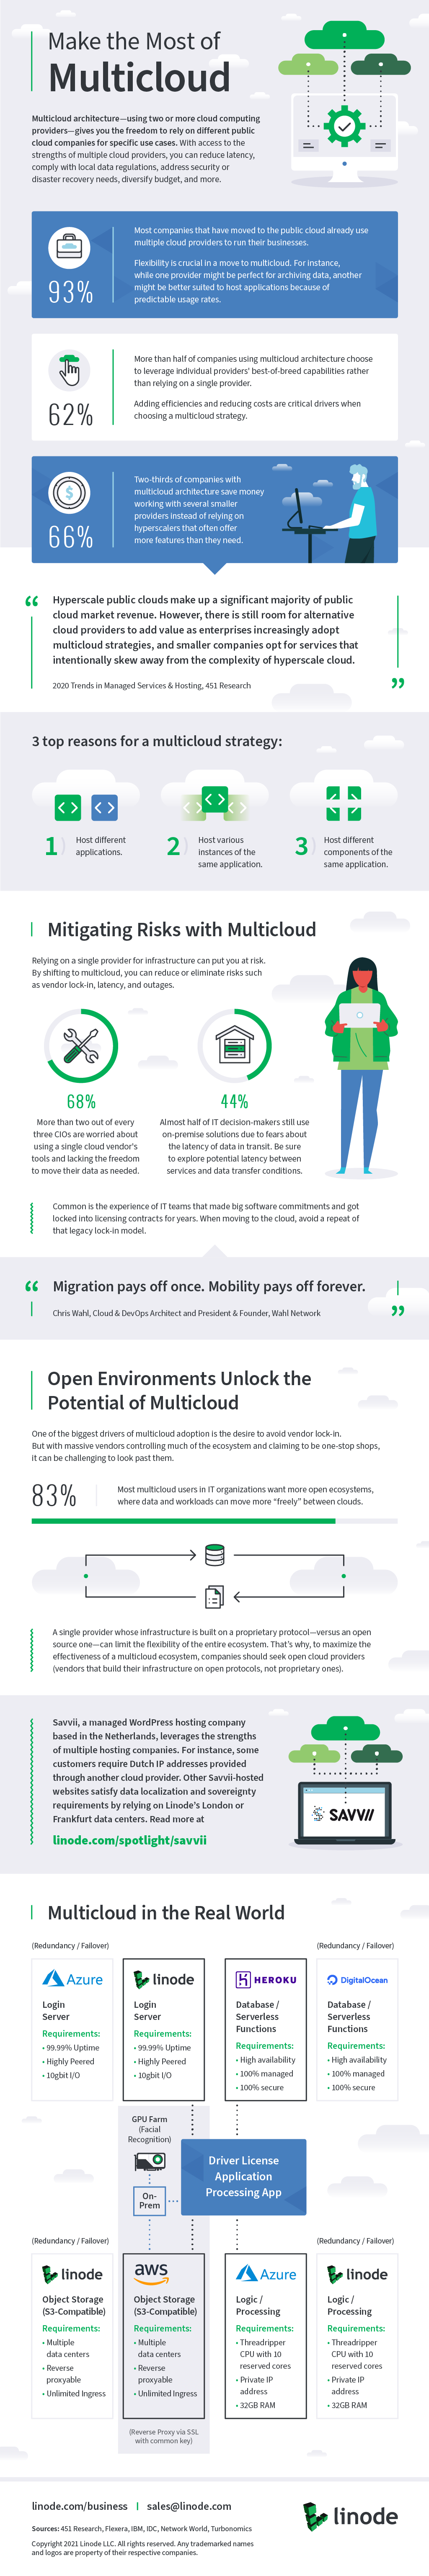 Make the Most of Multicloud Infographic